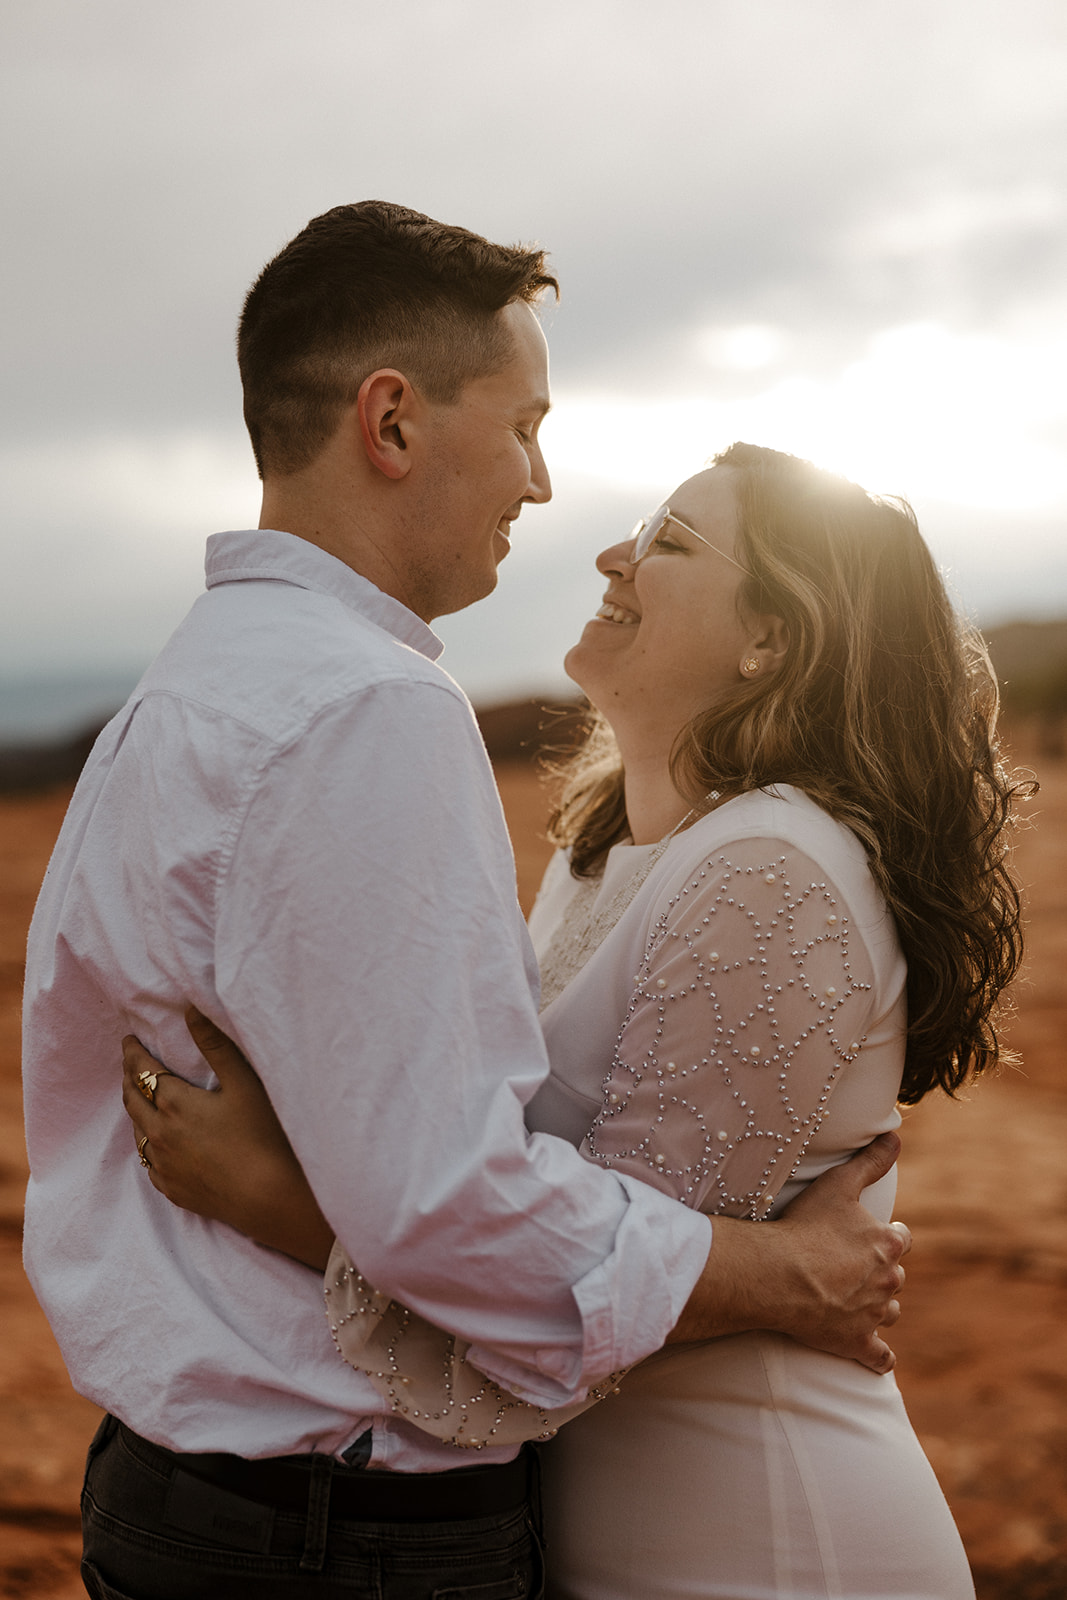 Beautiful couple share a laugh during their dreamy Sedona Arizona engagement photoshoot